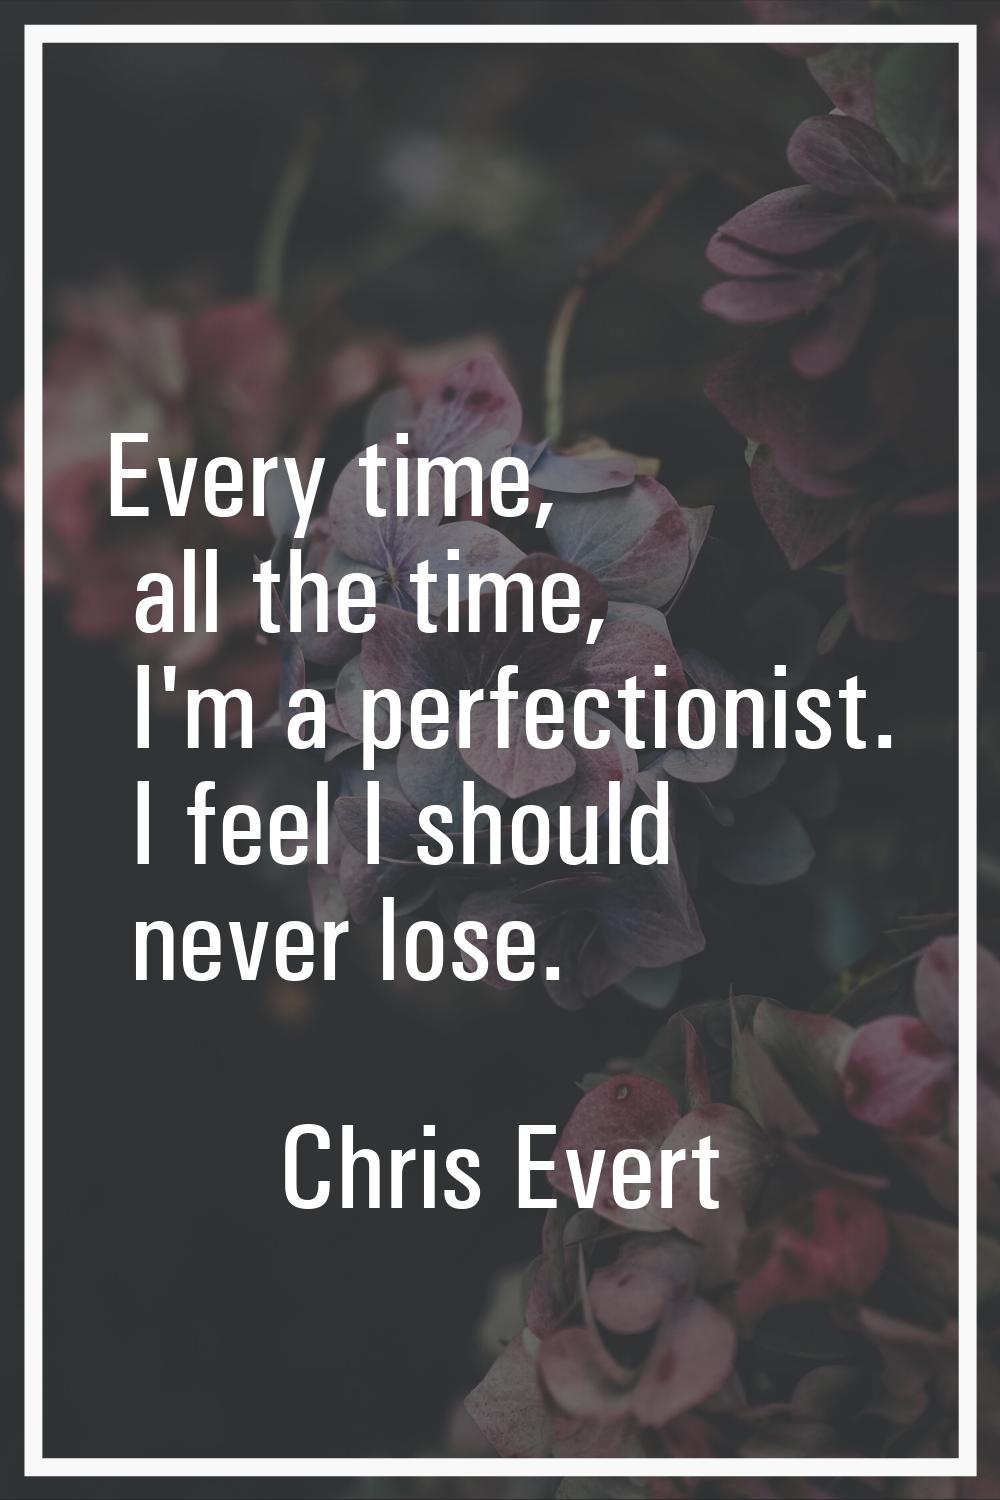 Every time, all the time, I'm a perfectionist. I feel I should never lose.